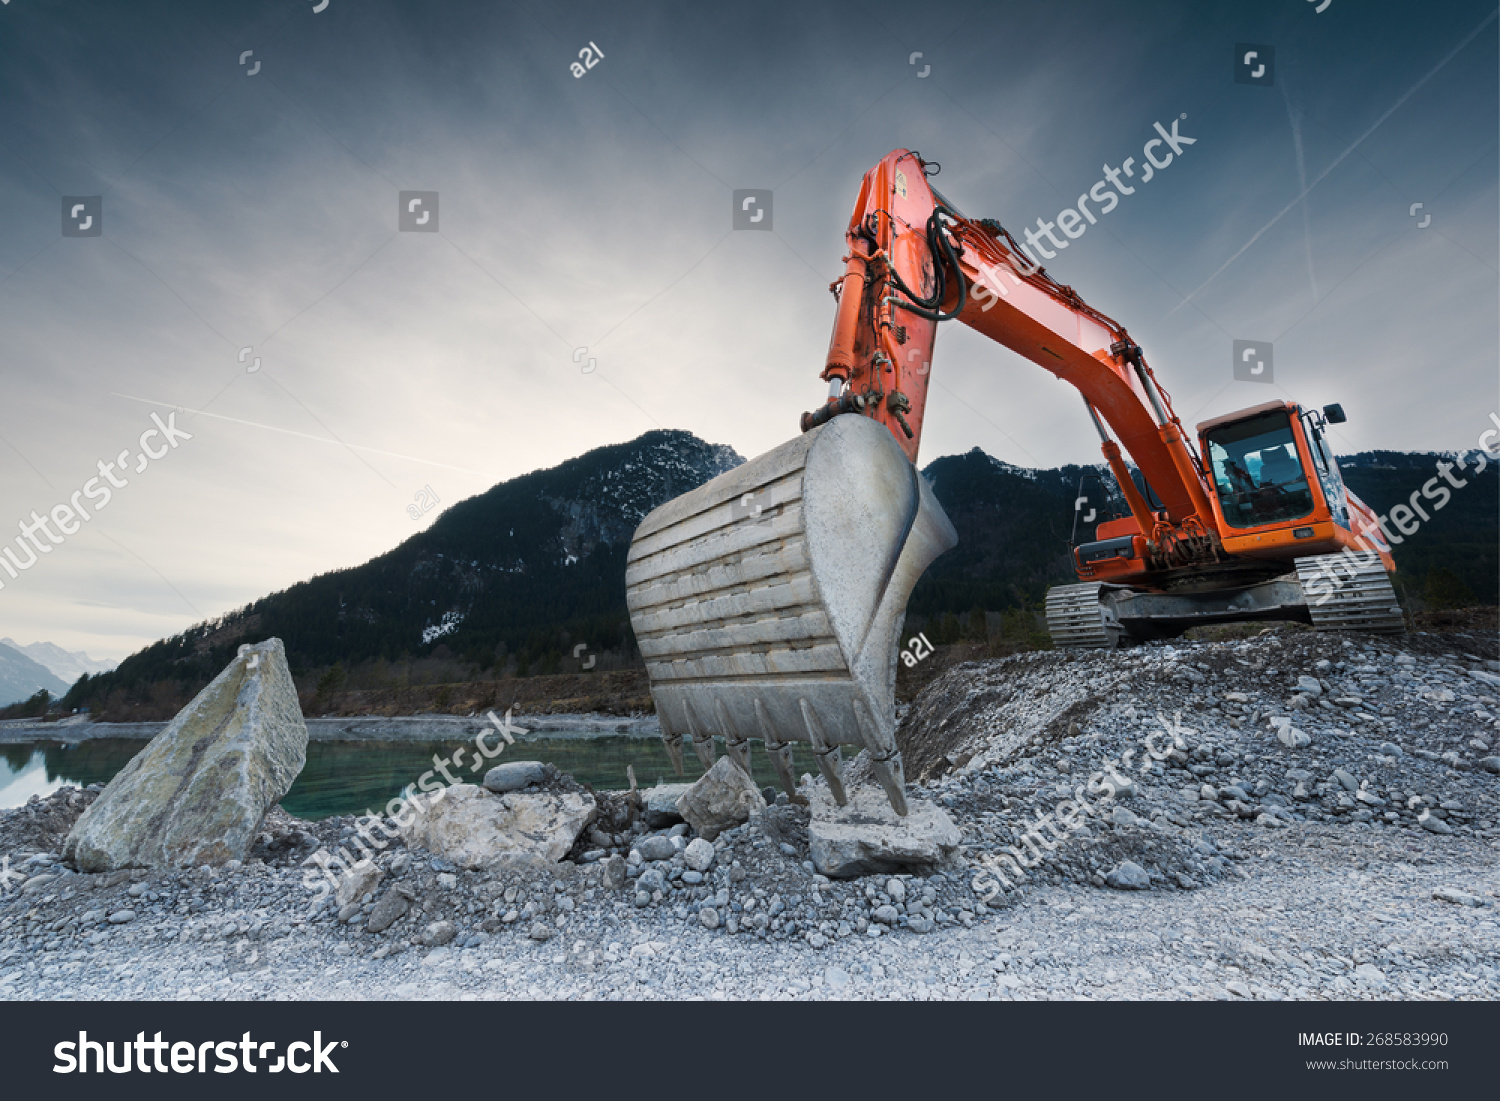 heavy organge excavator with shovel standing on hill with rocks #268583990